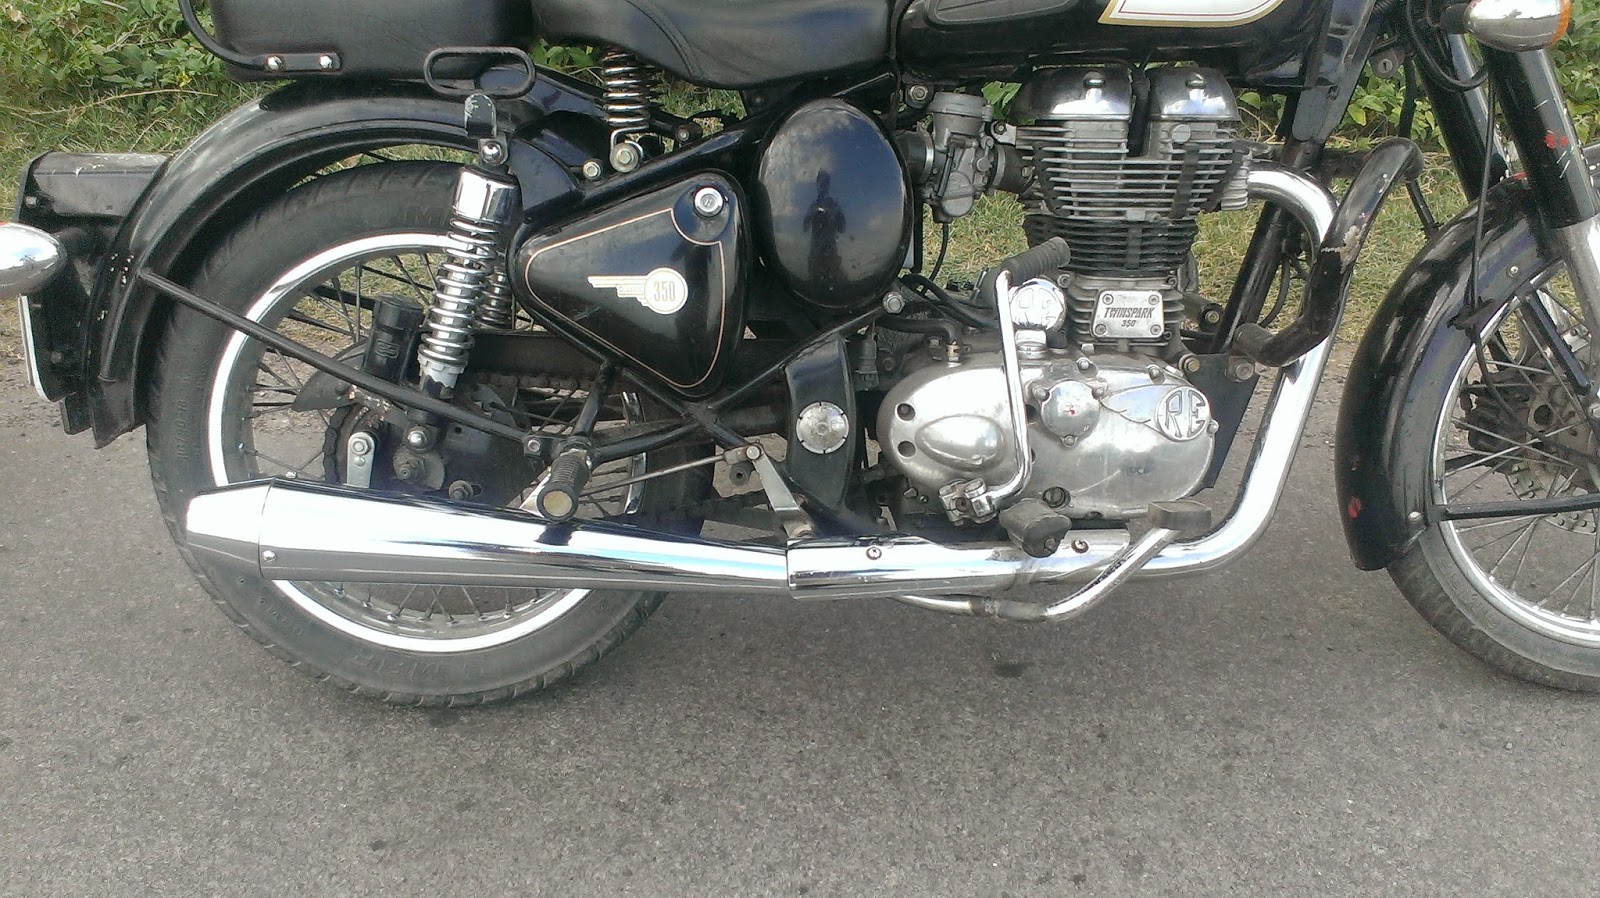 Megaphone Exhaust For Royal Enfield | vlr.eng.br